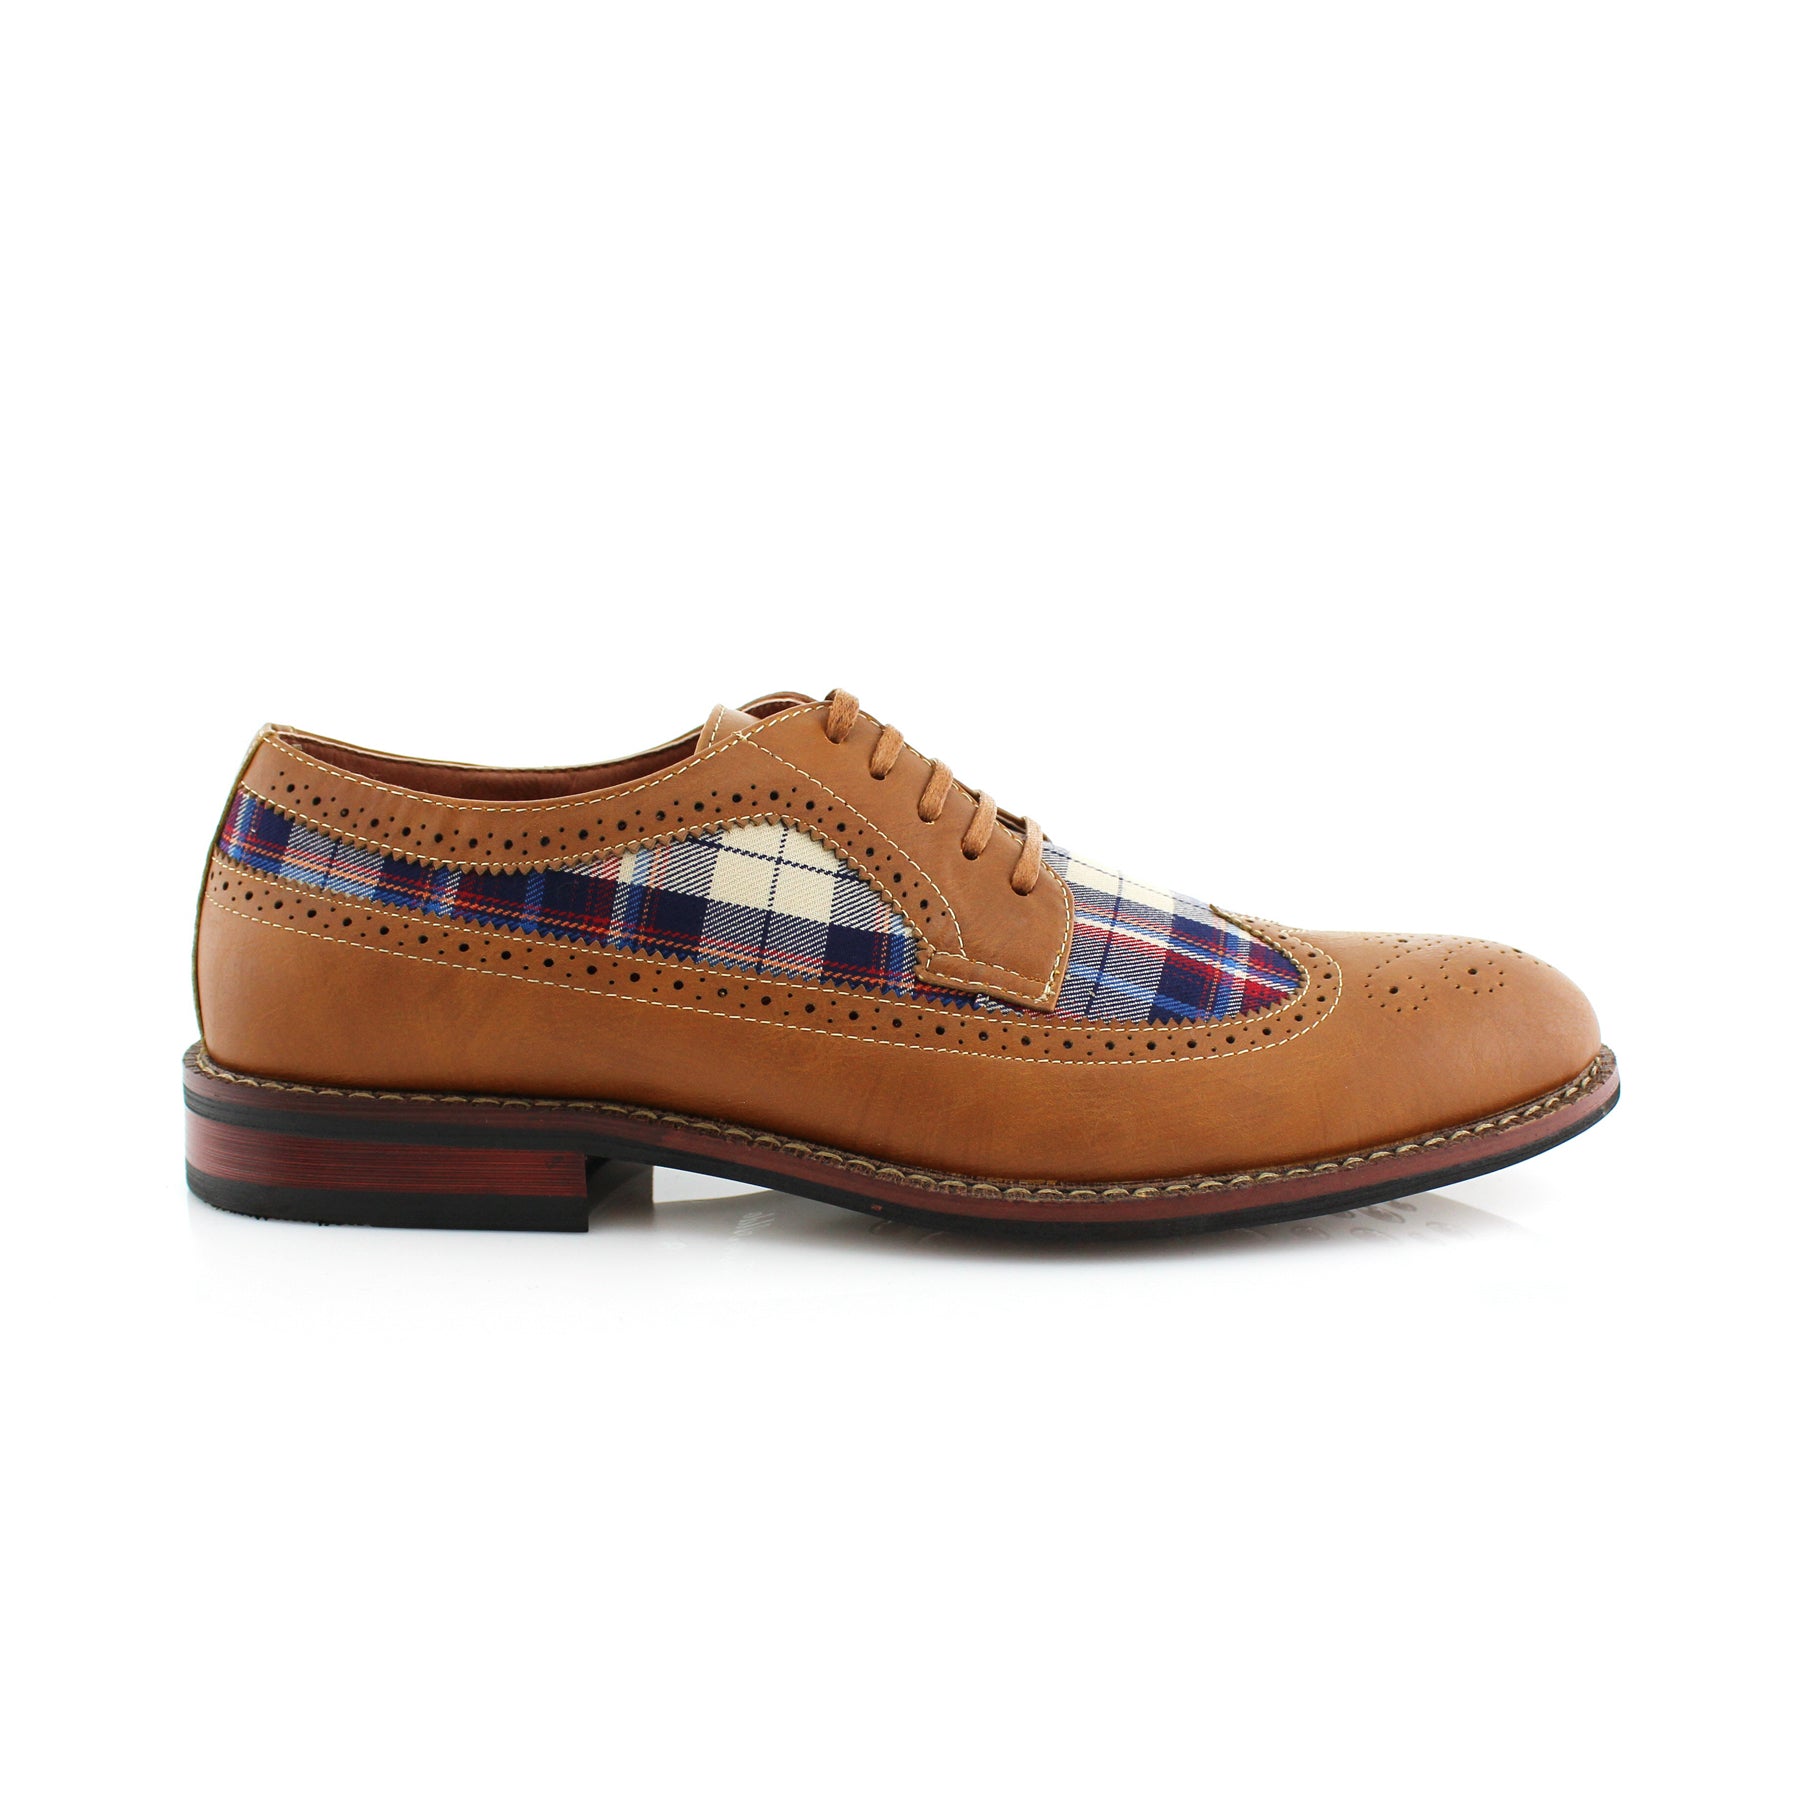 Plaid Long Wingtip Brogue Derby Shoes | Ron by Ferro Aldo | Conal Footwear | Outer Side Angle View